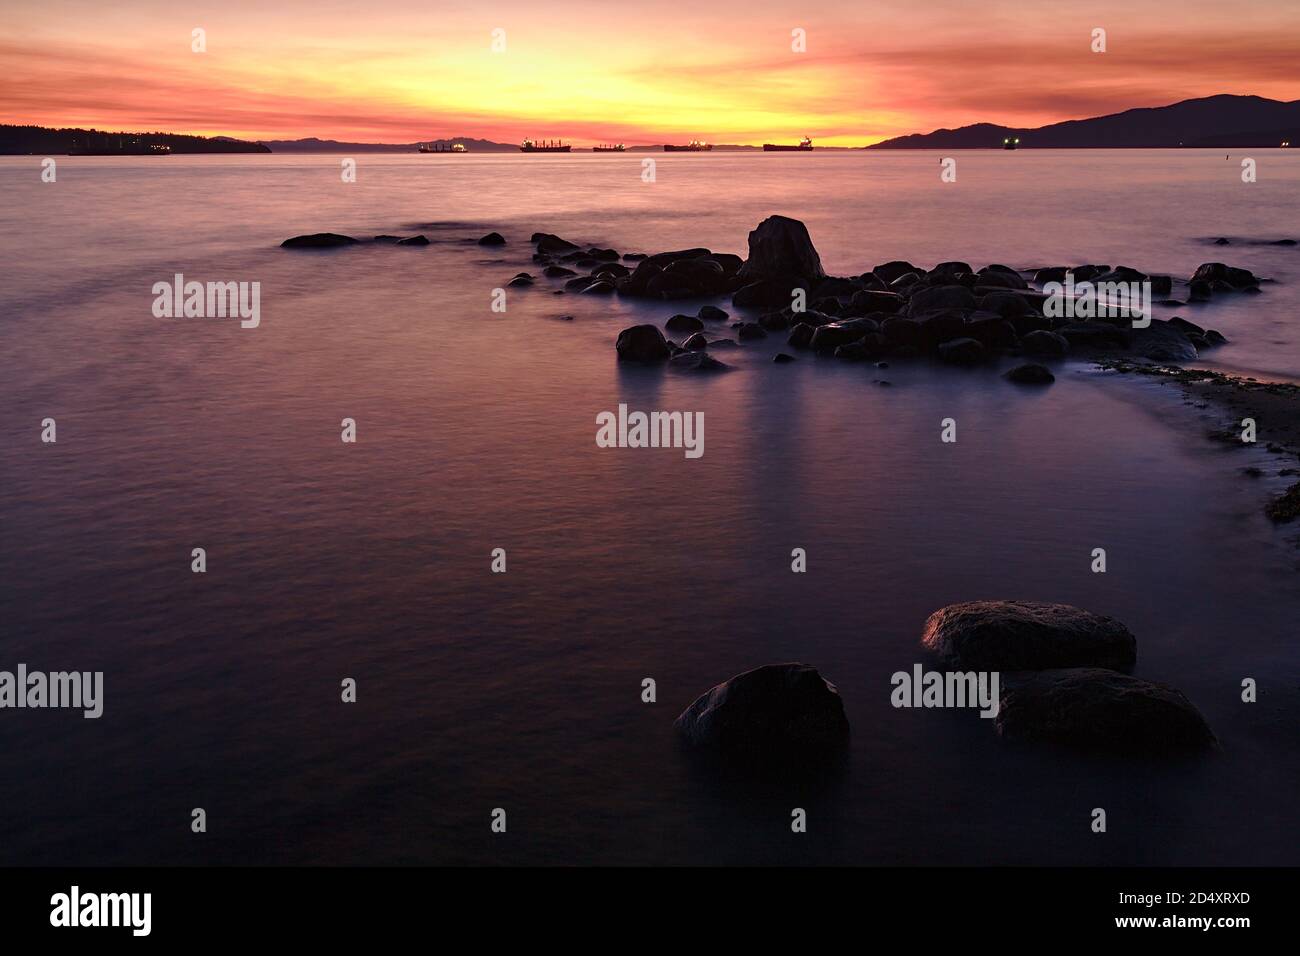 Long exposure of ocean beach with rocks. Twilight scene during a sunset from Stanley Park, Vancouver, British Columbia, Canada Stock Photo